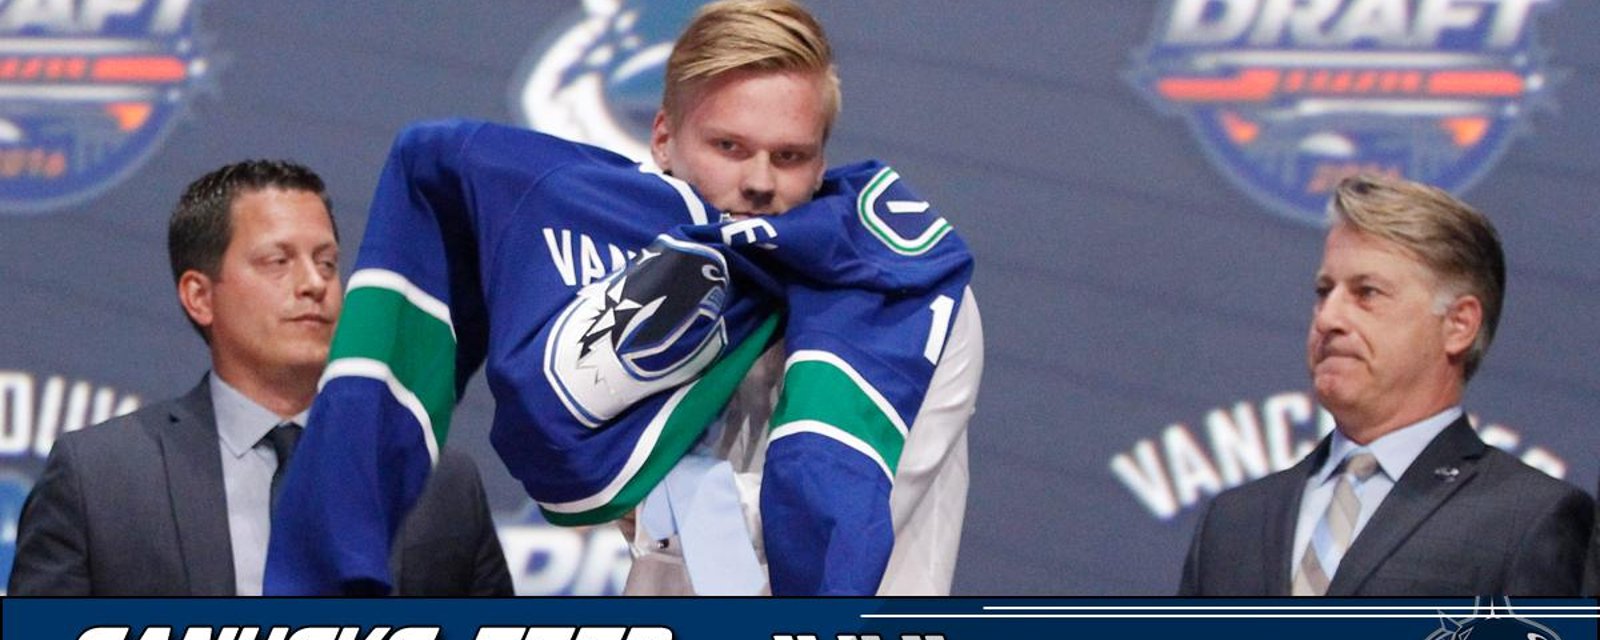 Report: Canucks prized prospect absolutely dominating